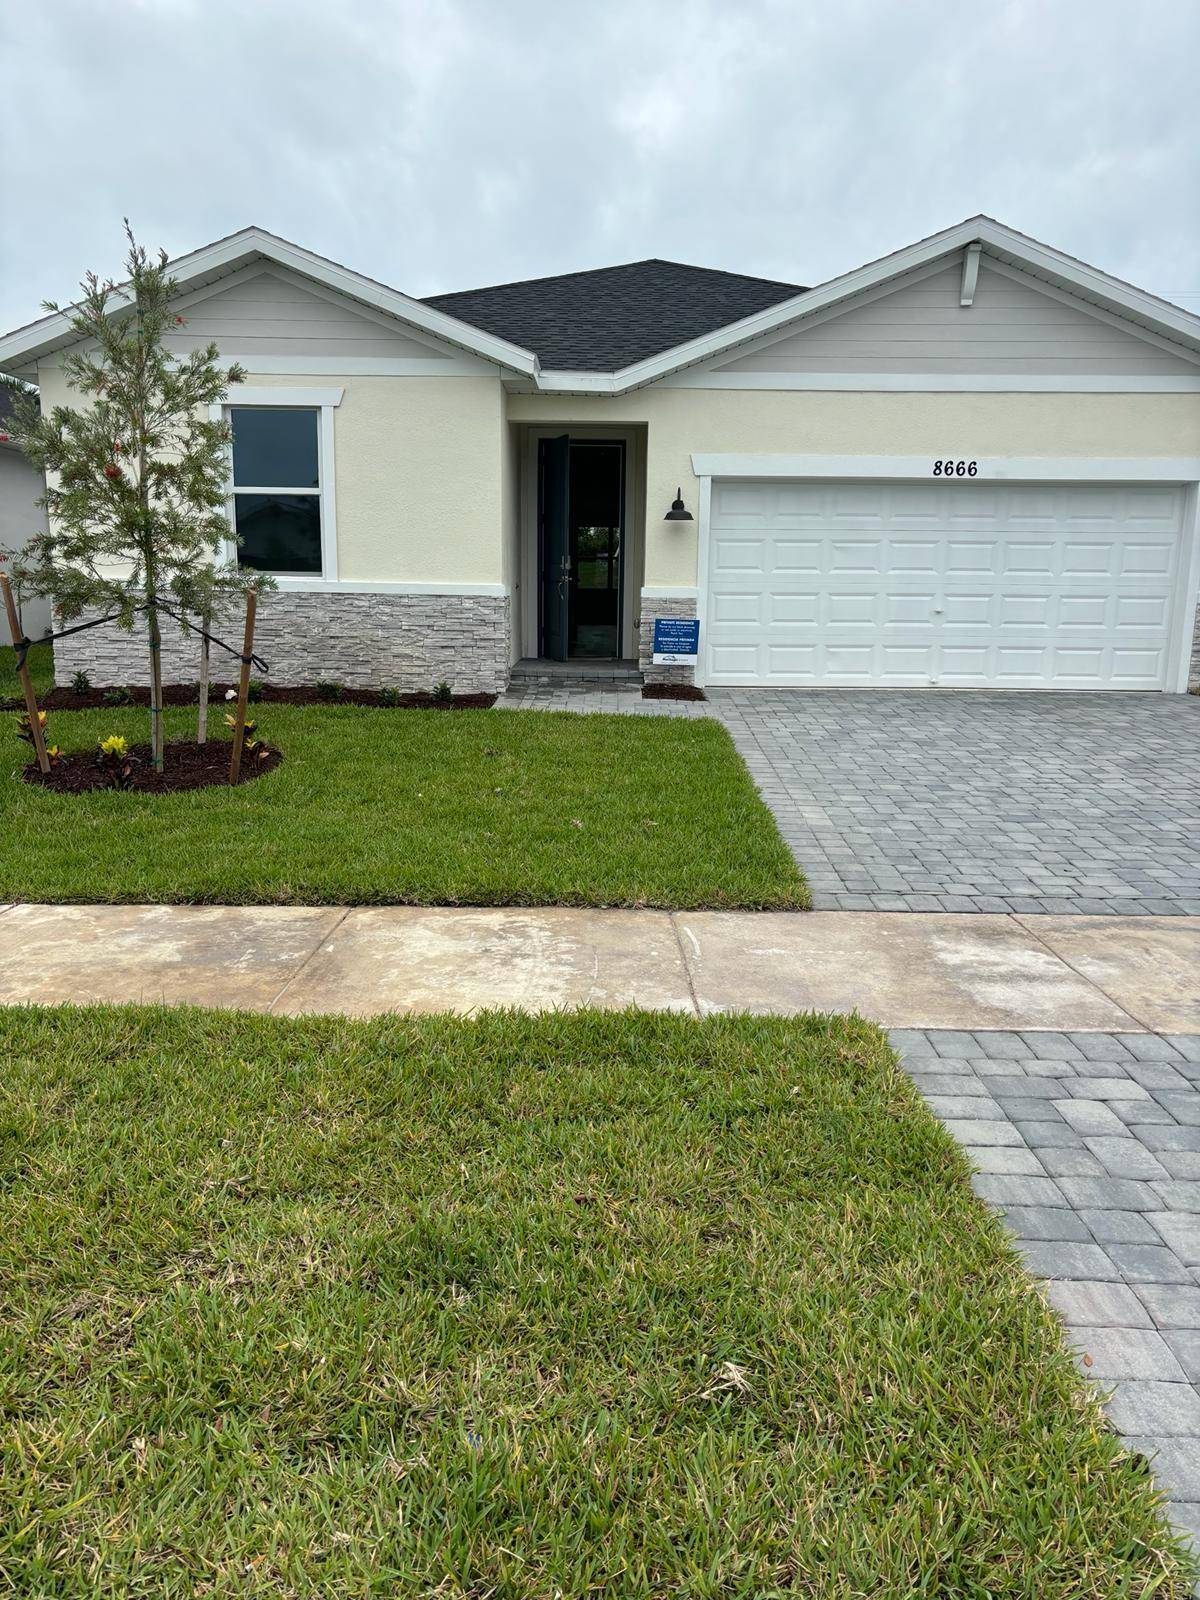 Featuring this brand new 4 bedrooms2 bath 2 car garagefeatures include stainless steel appliances, granite counter tops, impact windowsenergy efficient home easy access to commuter routes as well as the ...